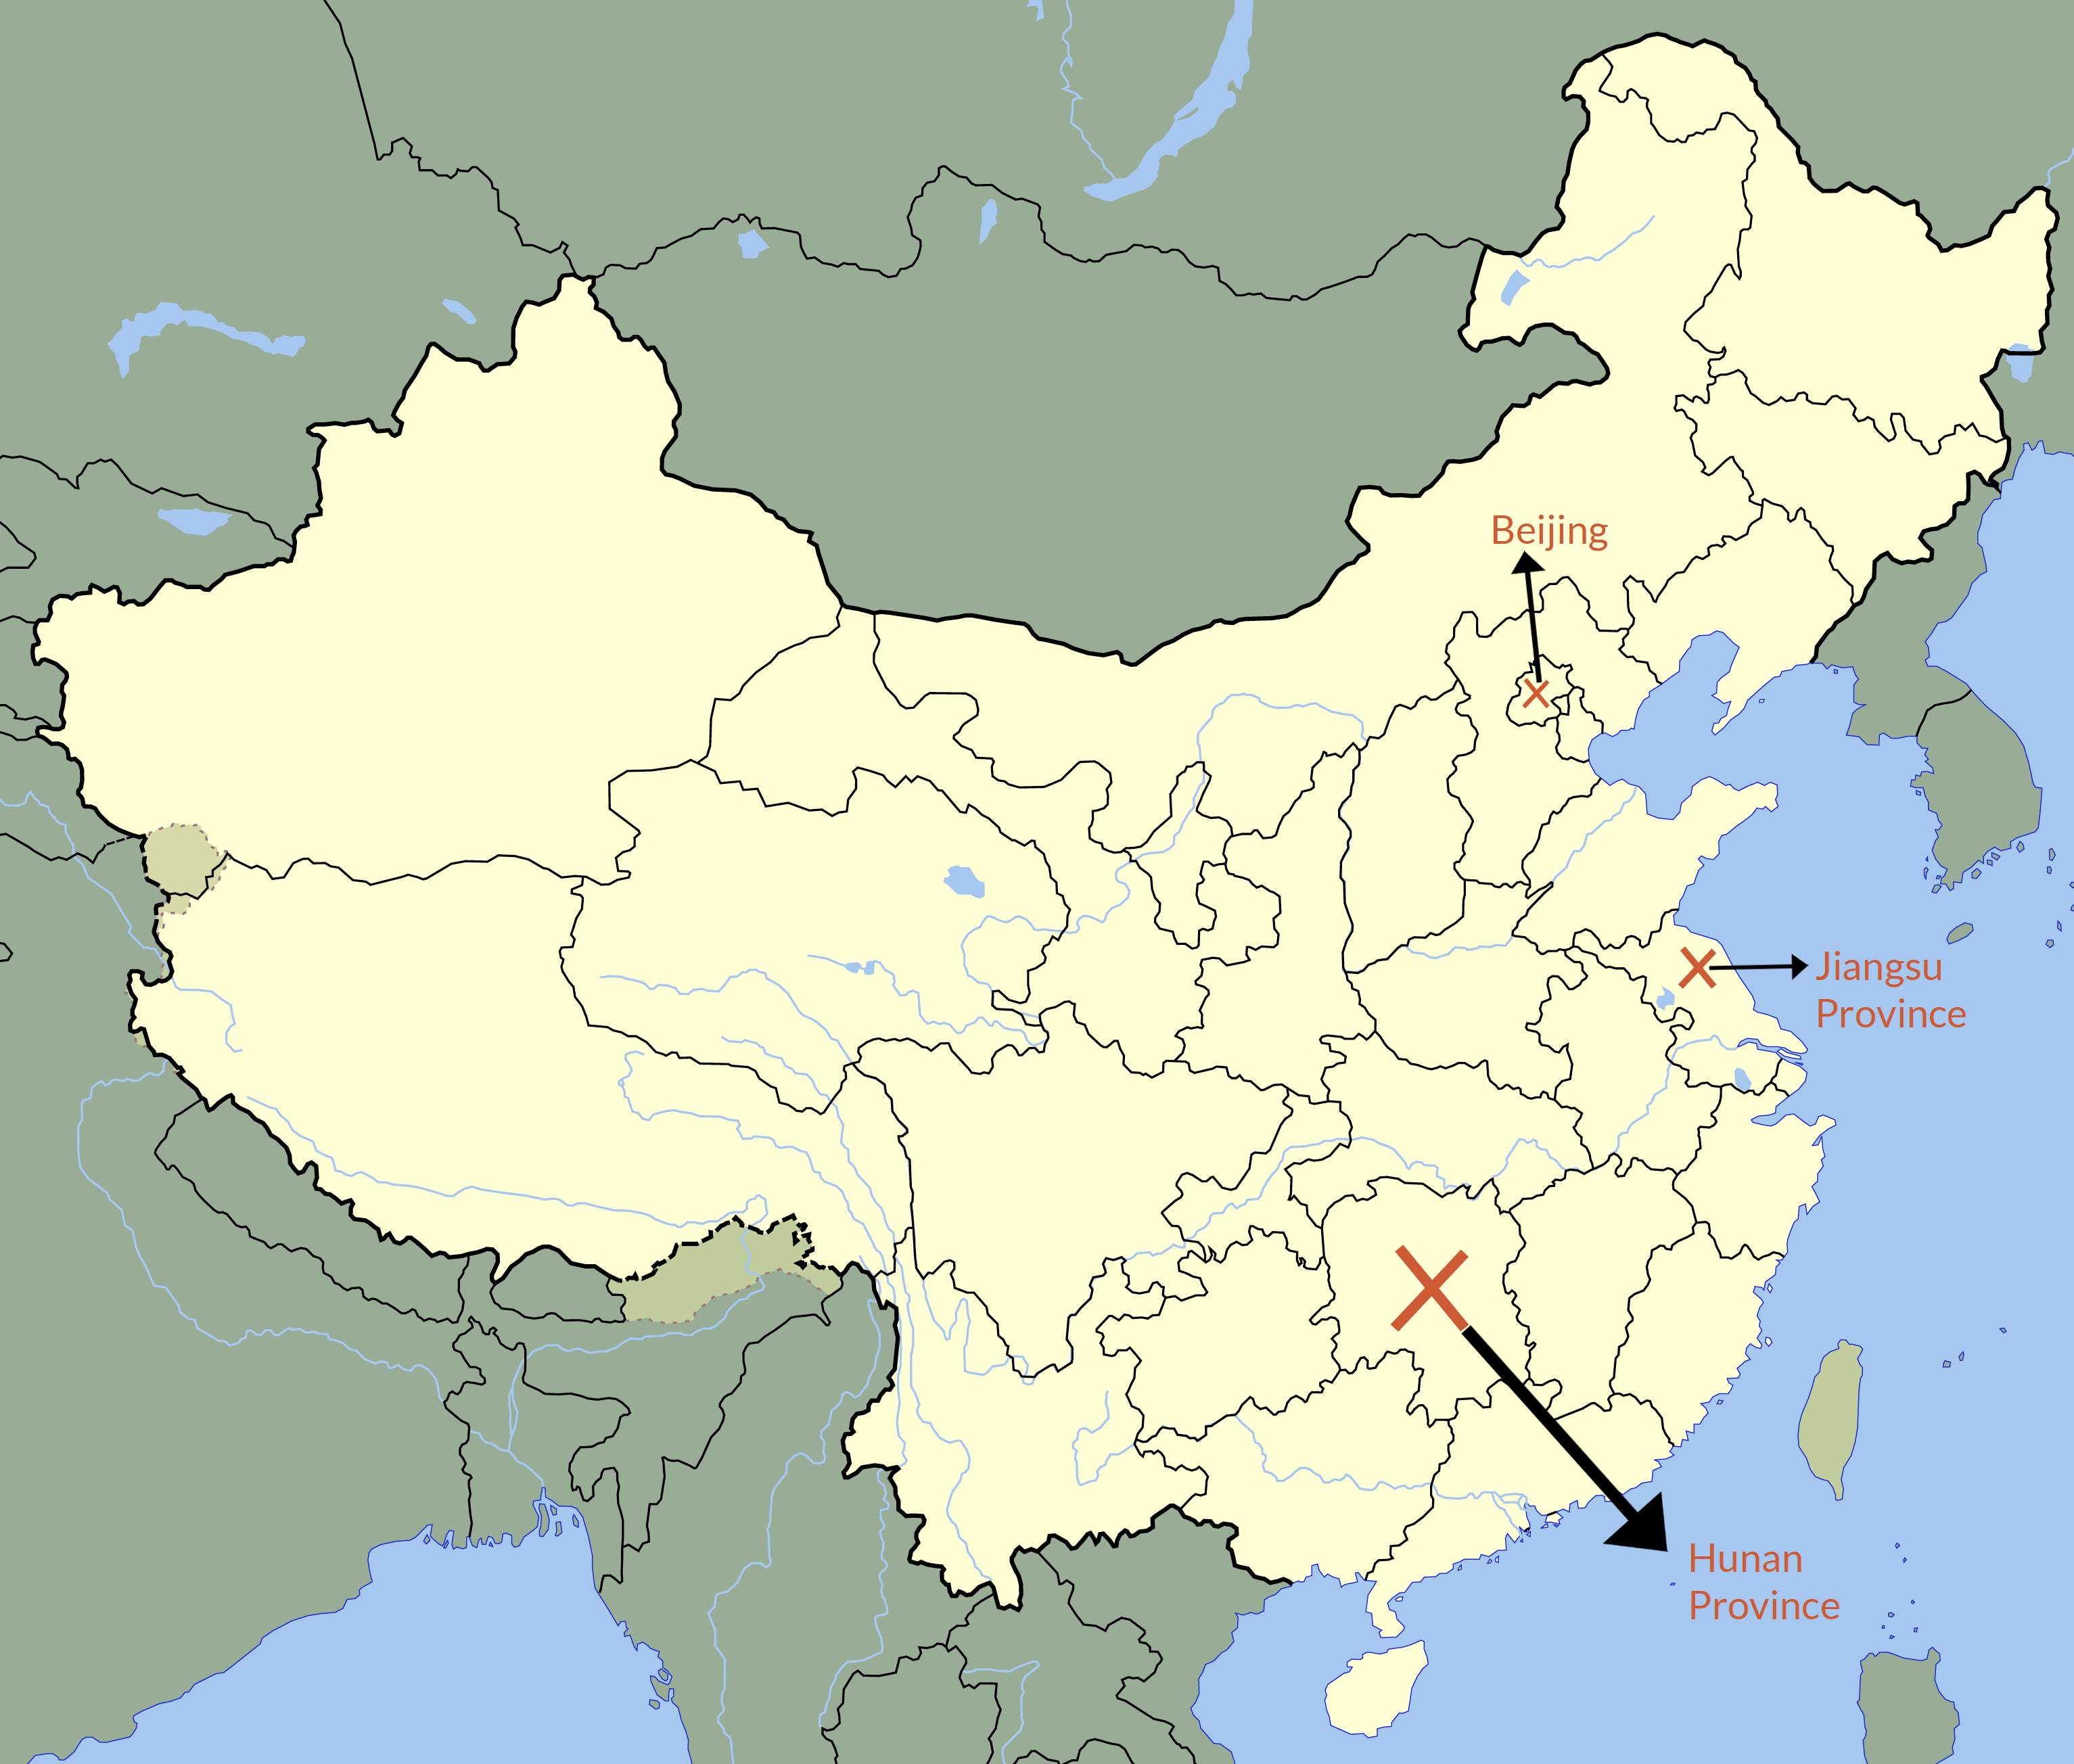 Map on the following page adapted from:  https://commons.wikimedia.org/wiki/File:China_blank_map.svg  